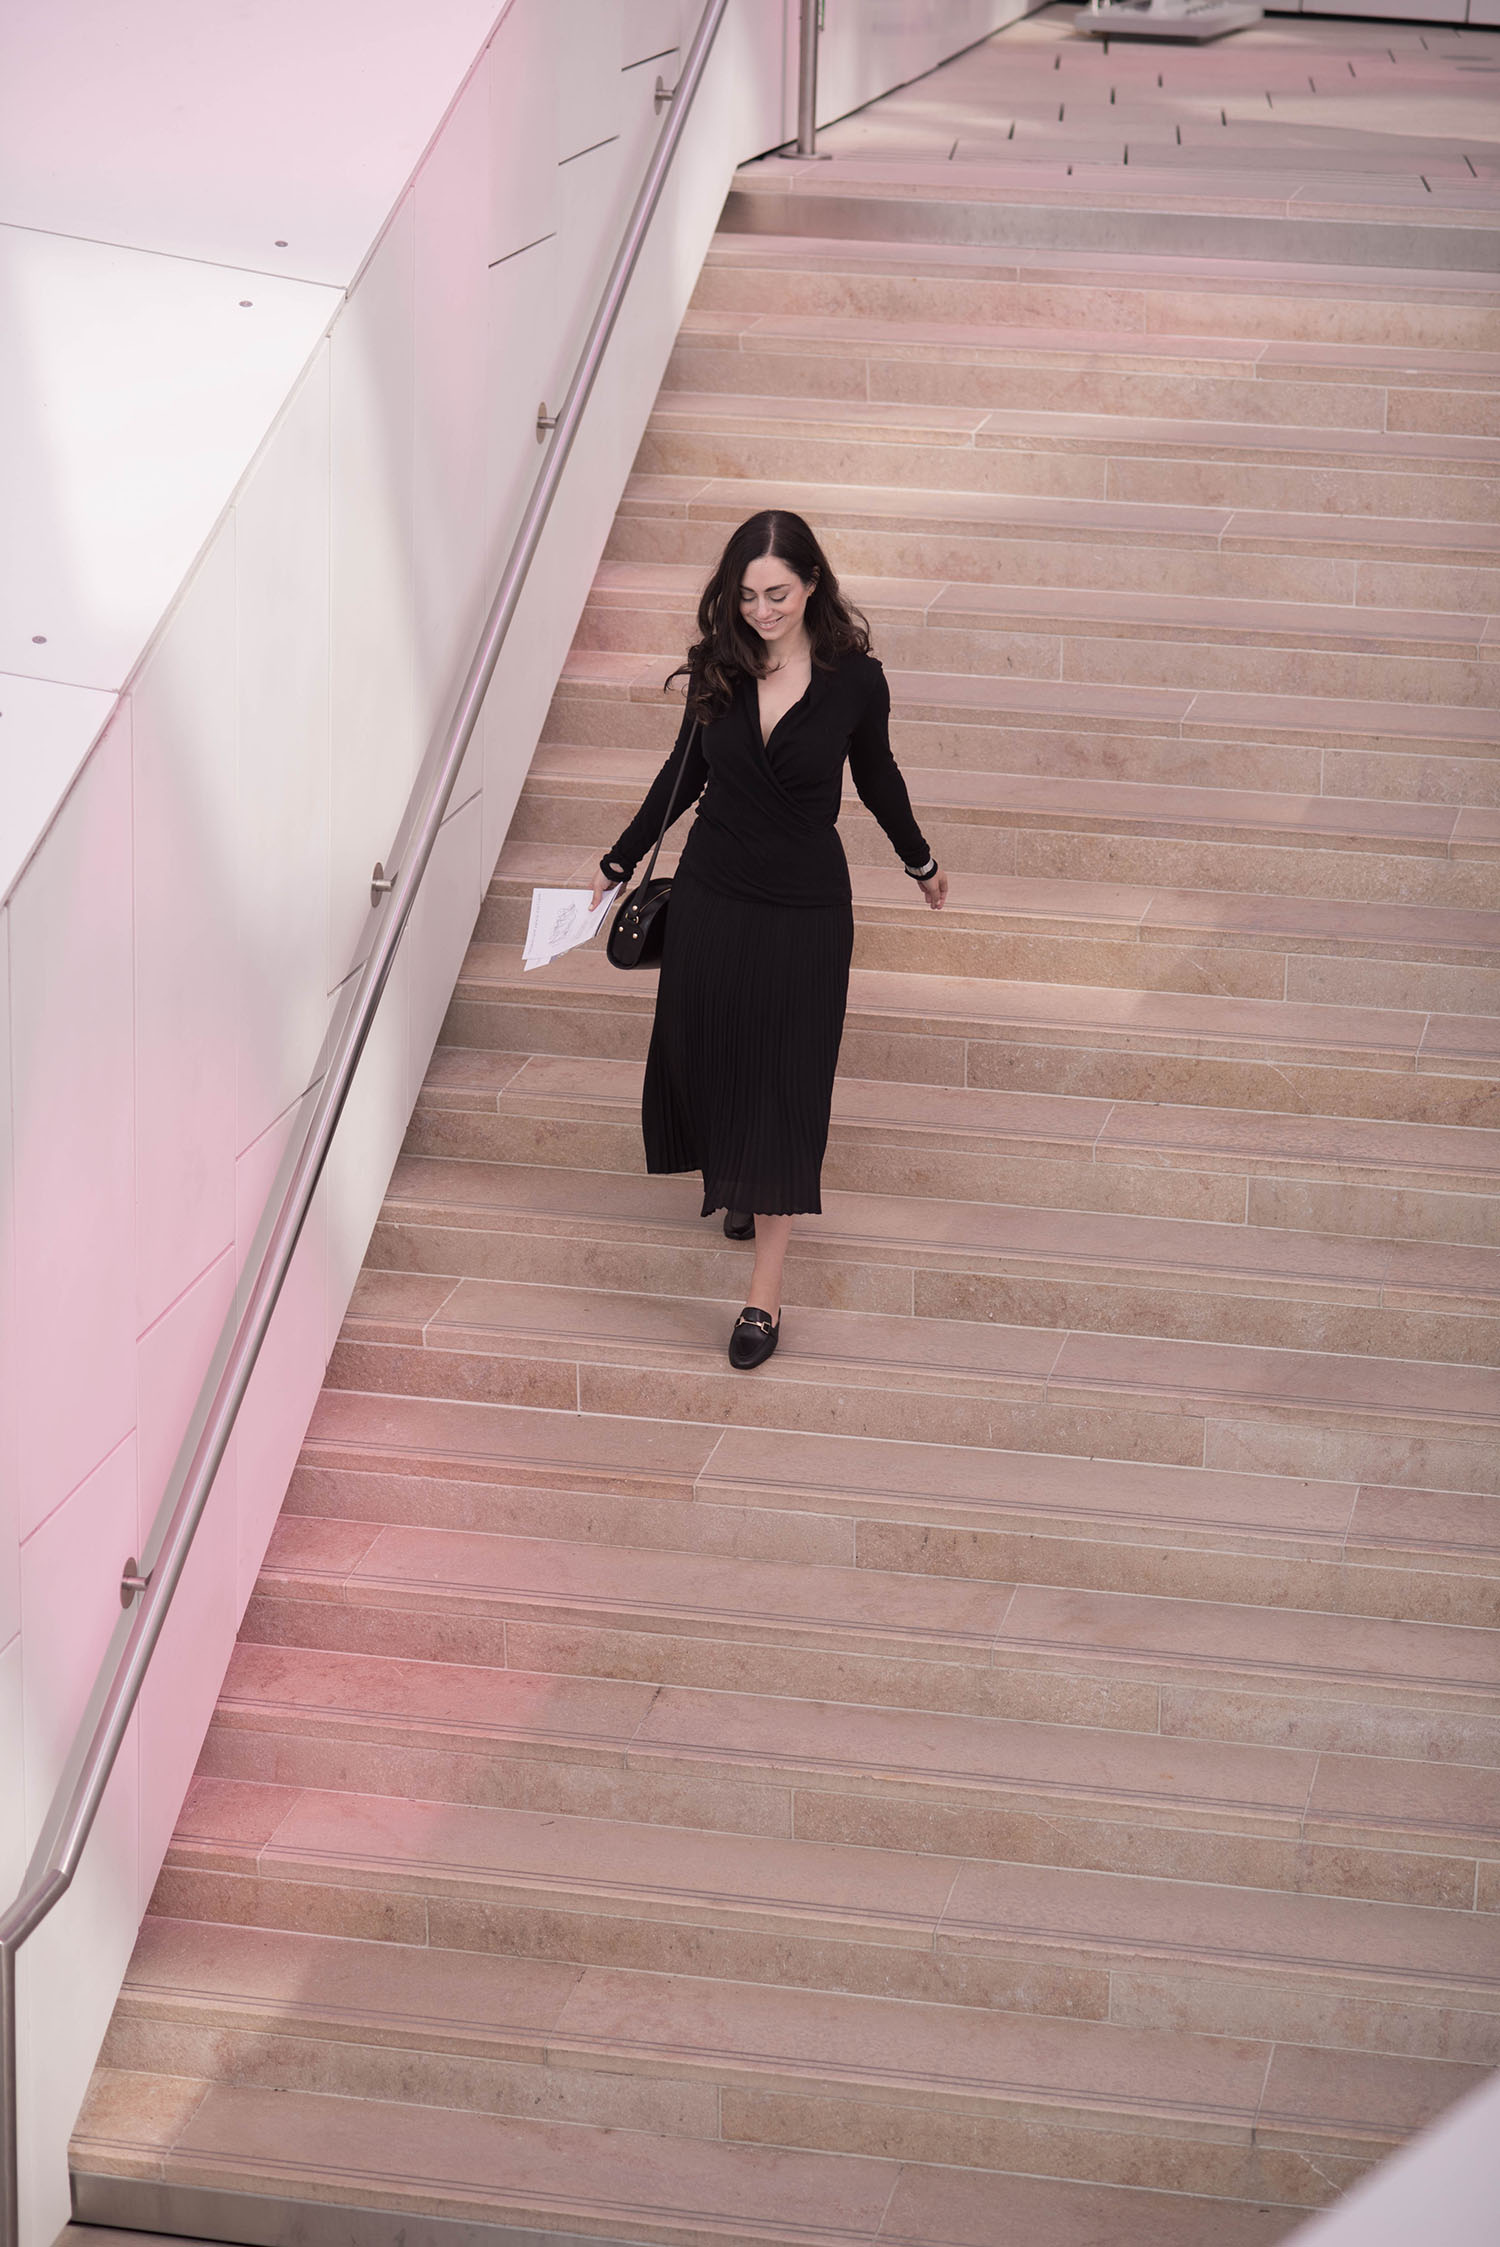 Fashion blogger Cee Fardoe of Coco & Vera walks down the stairs at the Fondation Louis Vuitton in Paris wearing an Aritzia pleated skirt and an Enza Costa wrap top